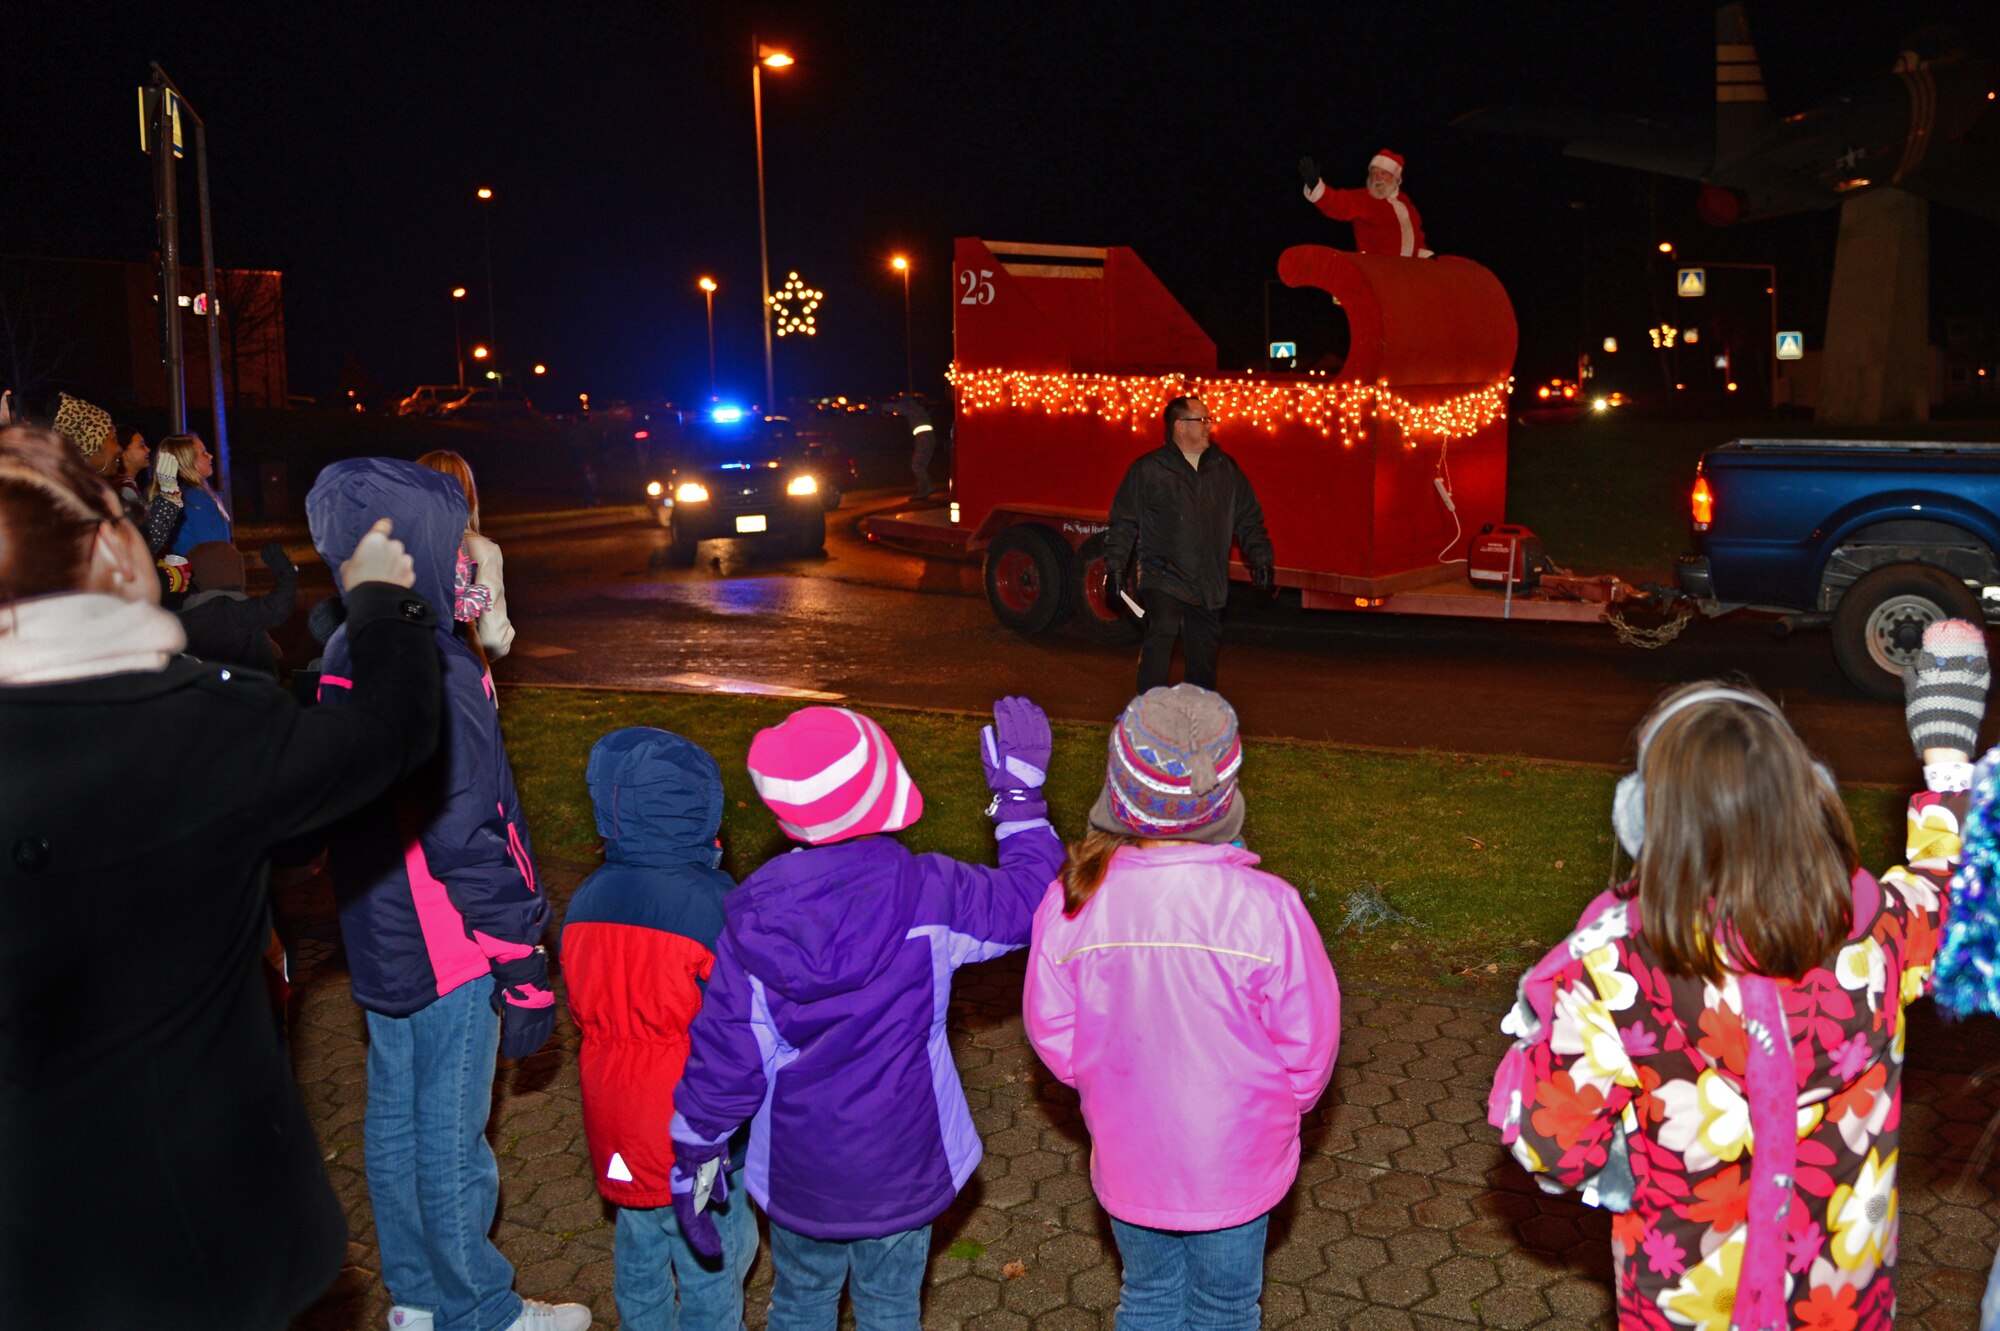 SPANGDAHLEM AIR BASE, Germany – Children wave as Santa rides past in a parade float during the Holiday Tree Lighting Ceremony Nov. 29, 2012. Santa also enjoyed snacks and beverages with family members after the ceremony to spread holiday cheer. The event brought members of the community together to get into the holiday spirit while strengthening local partnerships. (U.S. Air Force photo by Airman 1st Class Dillon Davis/Released)